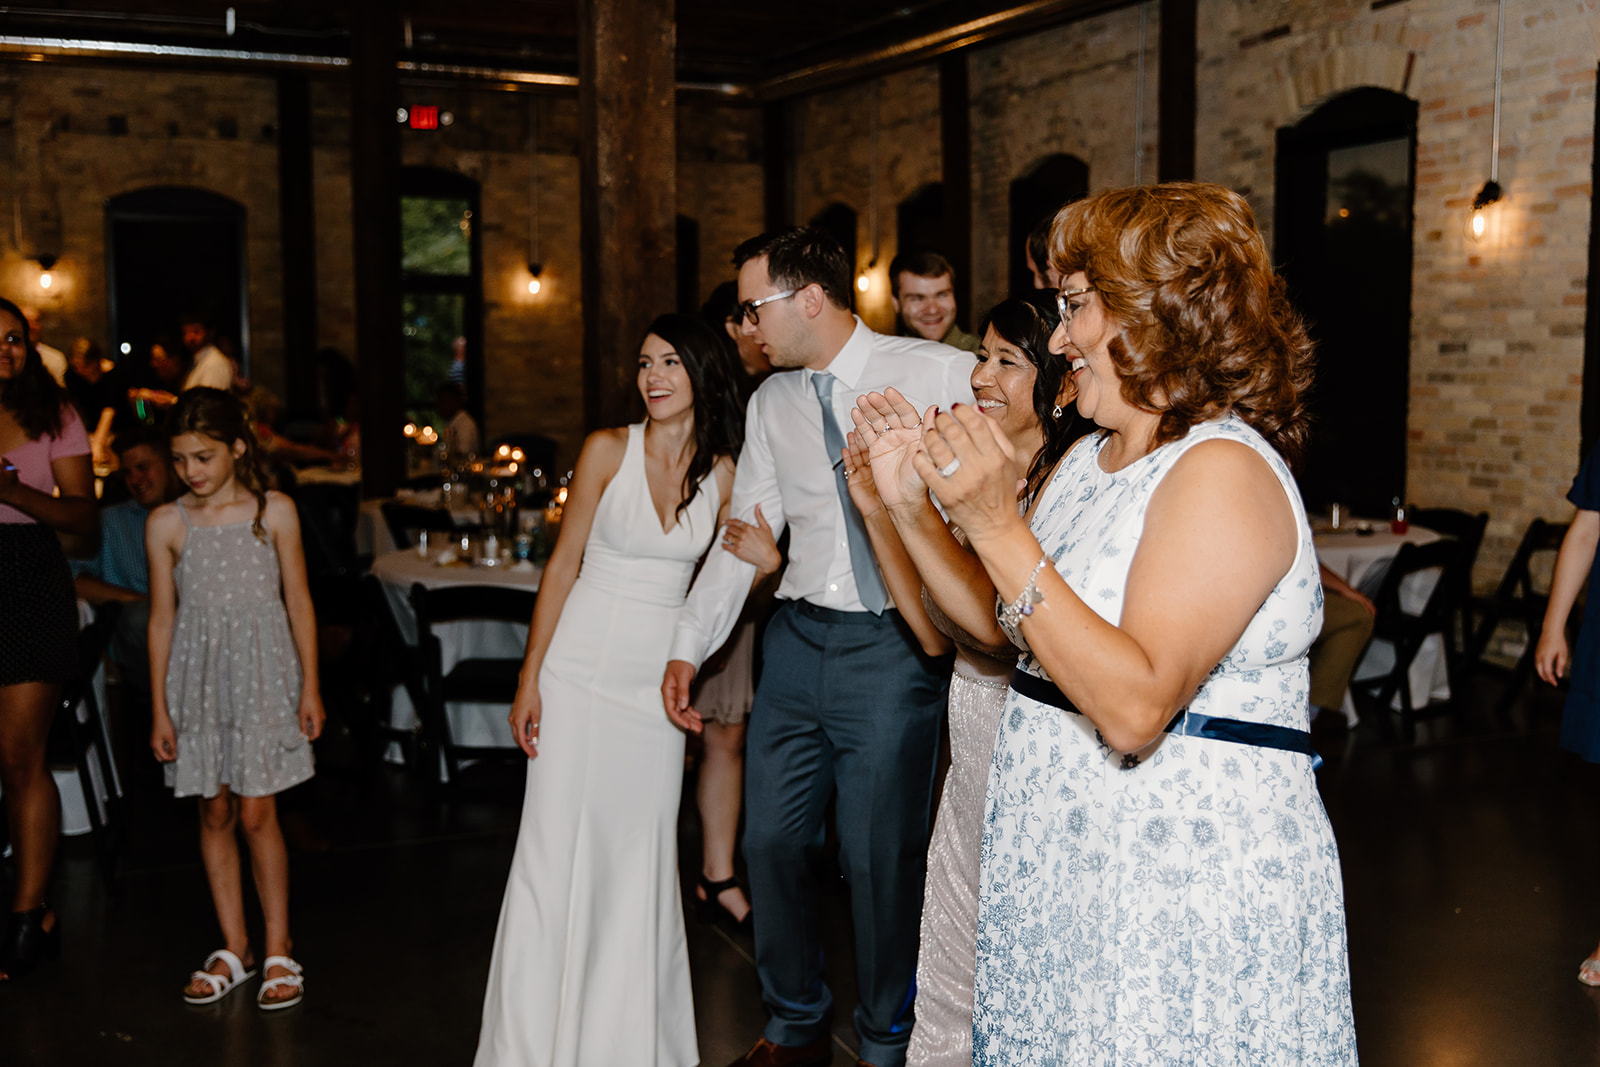 Bride and groom dance with guests on the dance floor